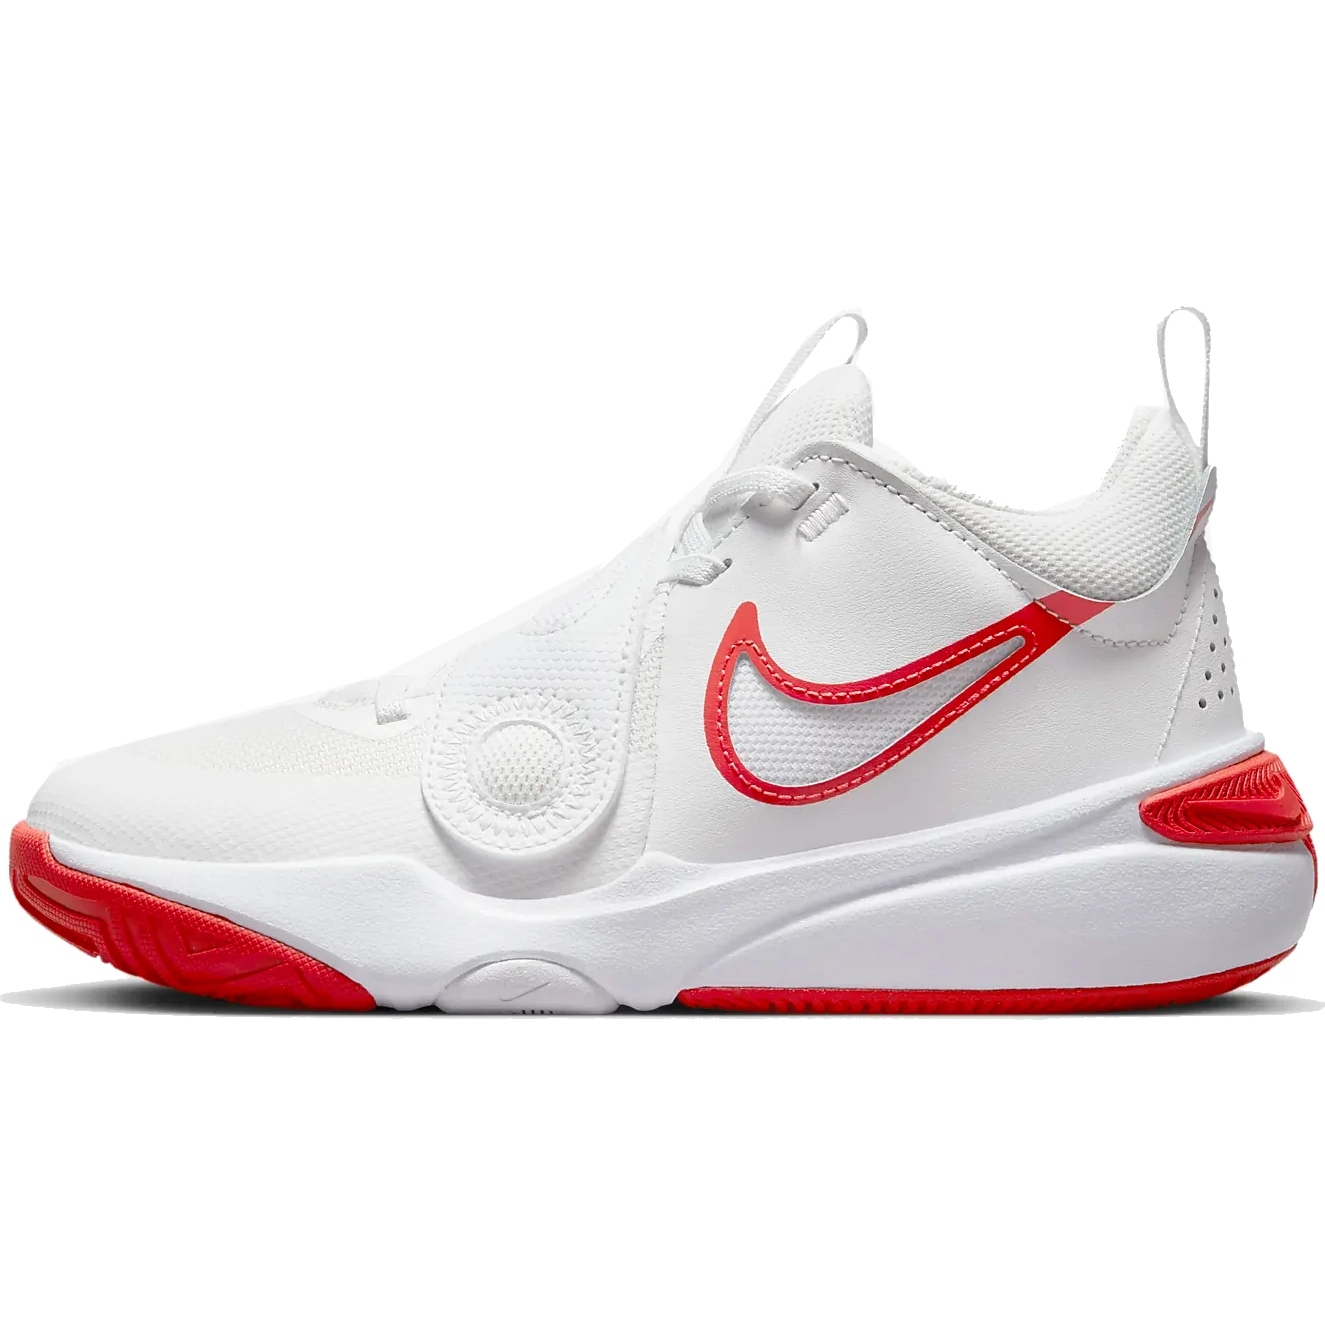 Picture of Nike Team Hustle D 11 Basketball Shoes Kids - summit white/track red-white DV8996-102